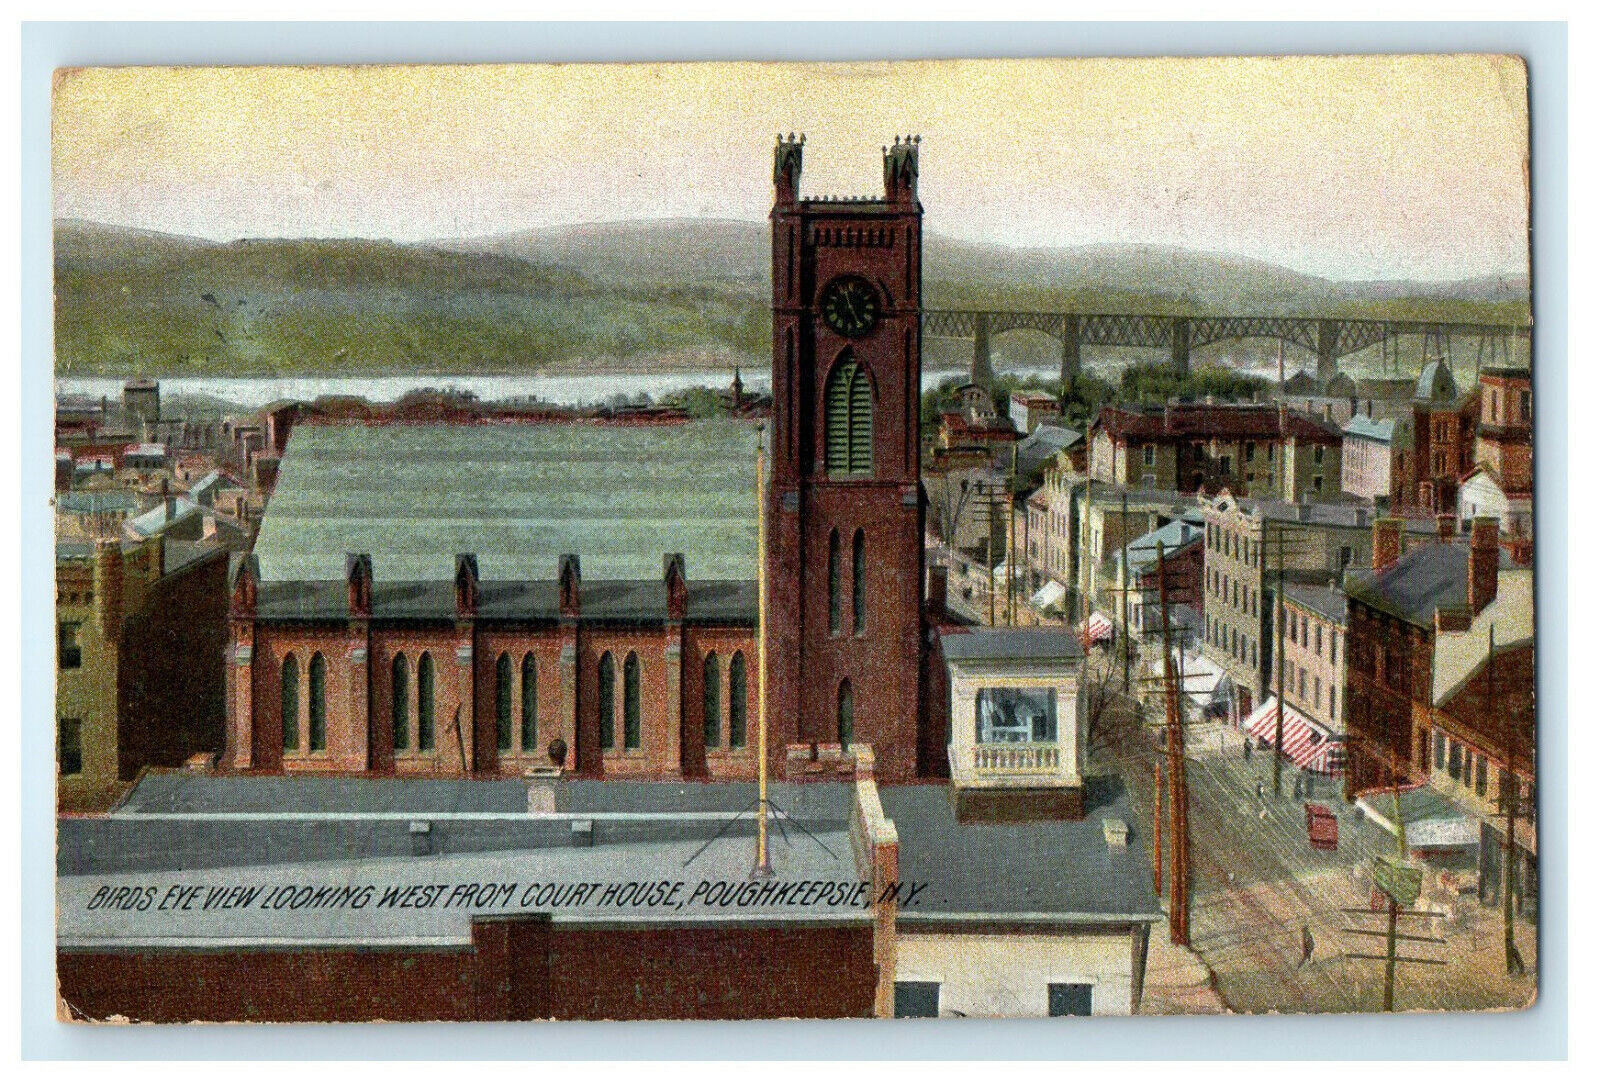 c1905 Bird\'s Eye View Looming West from Court House Poughkeepsie NY Postcard